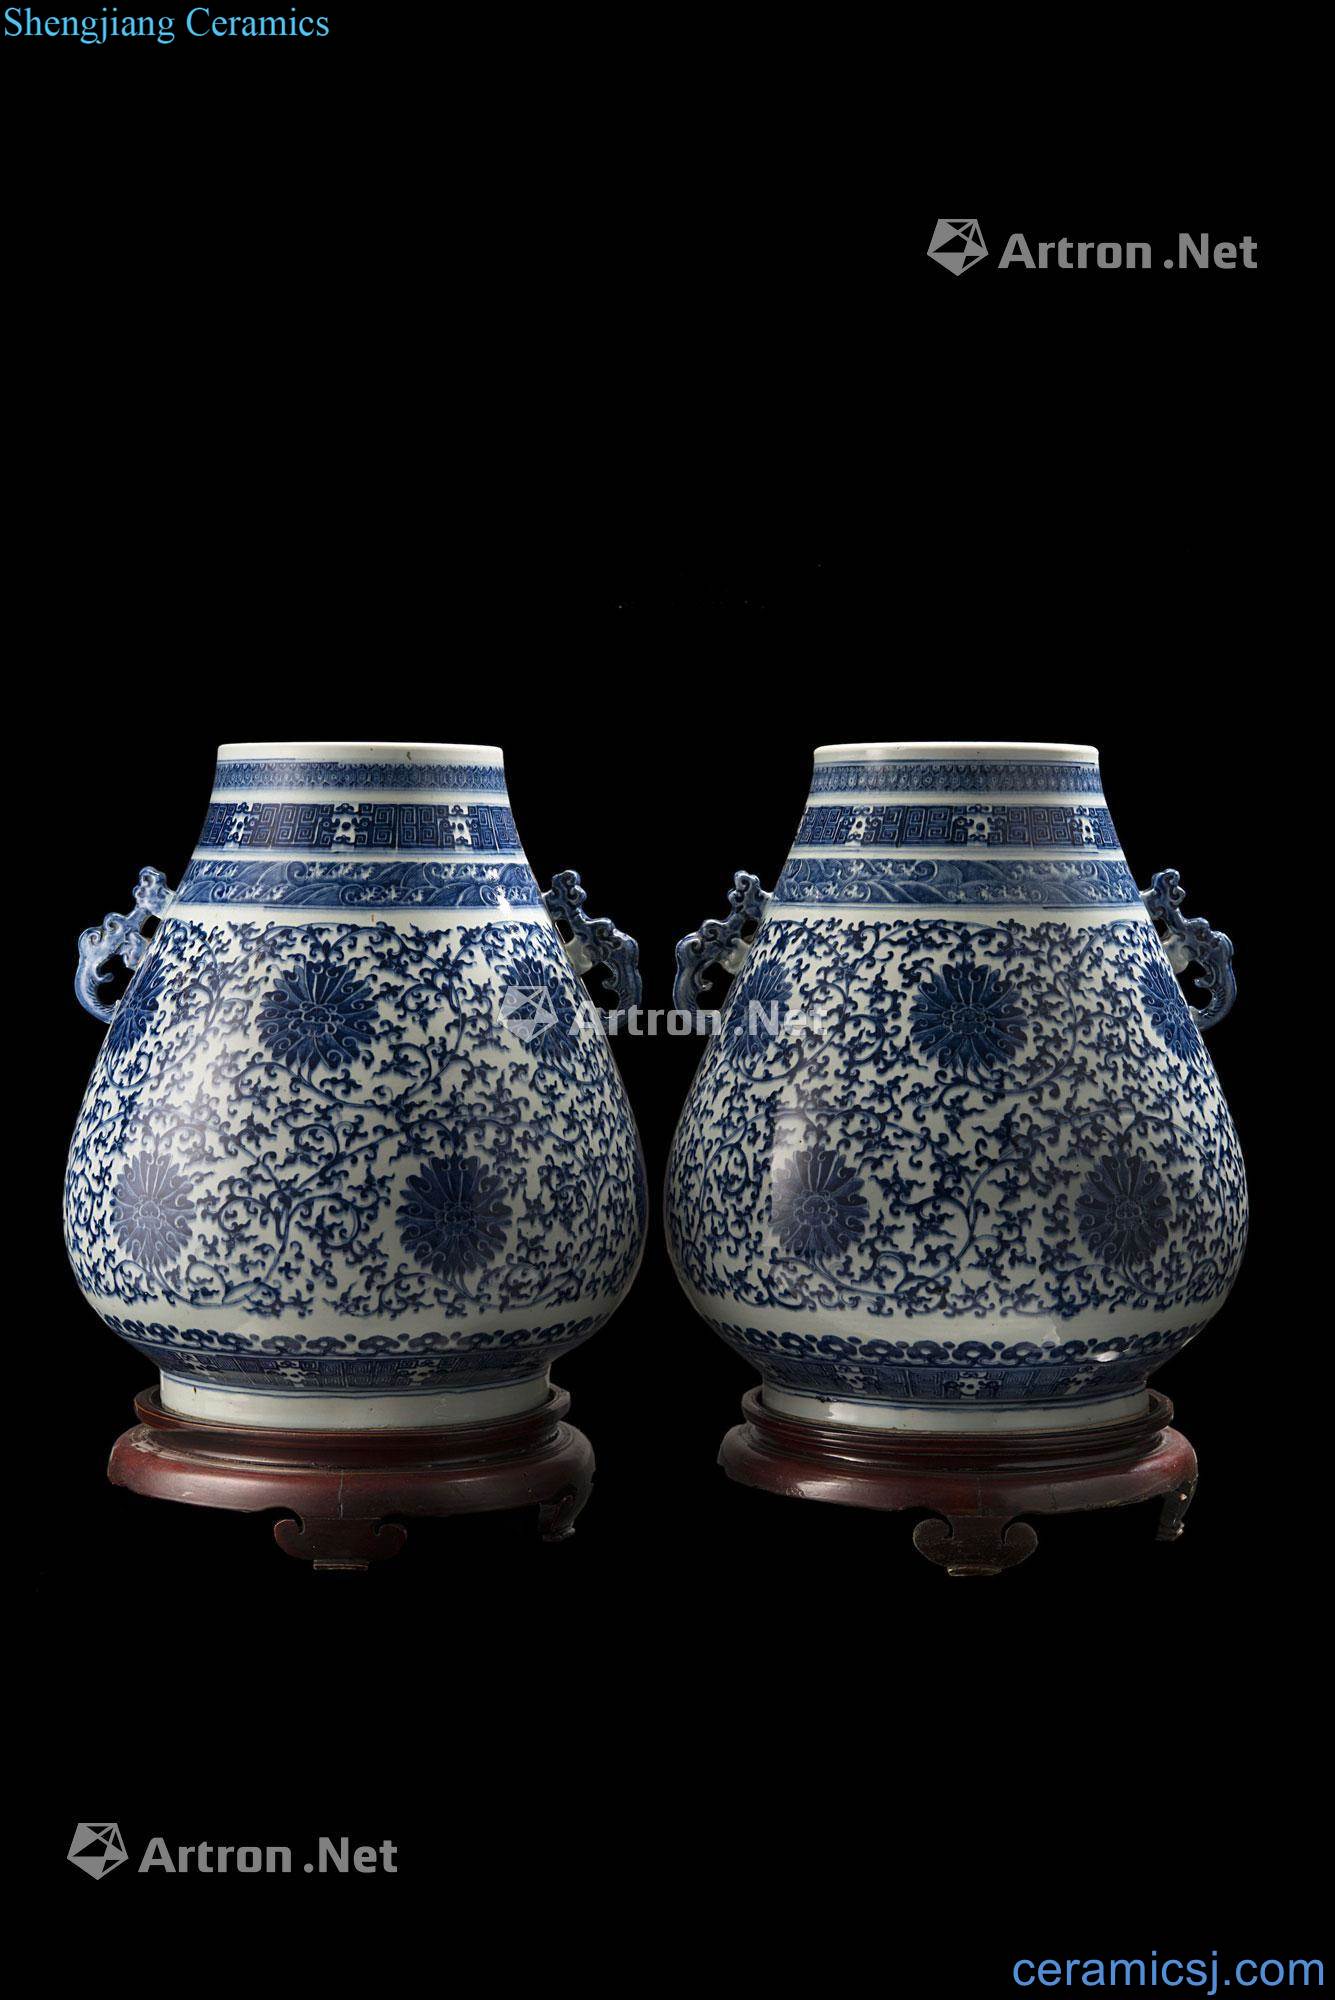 China in the 19th century Green Hualien pattern porcelain (a)